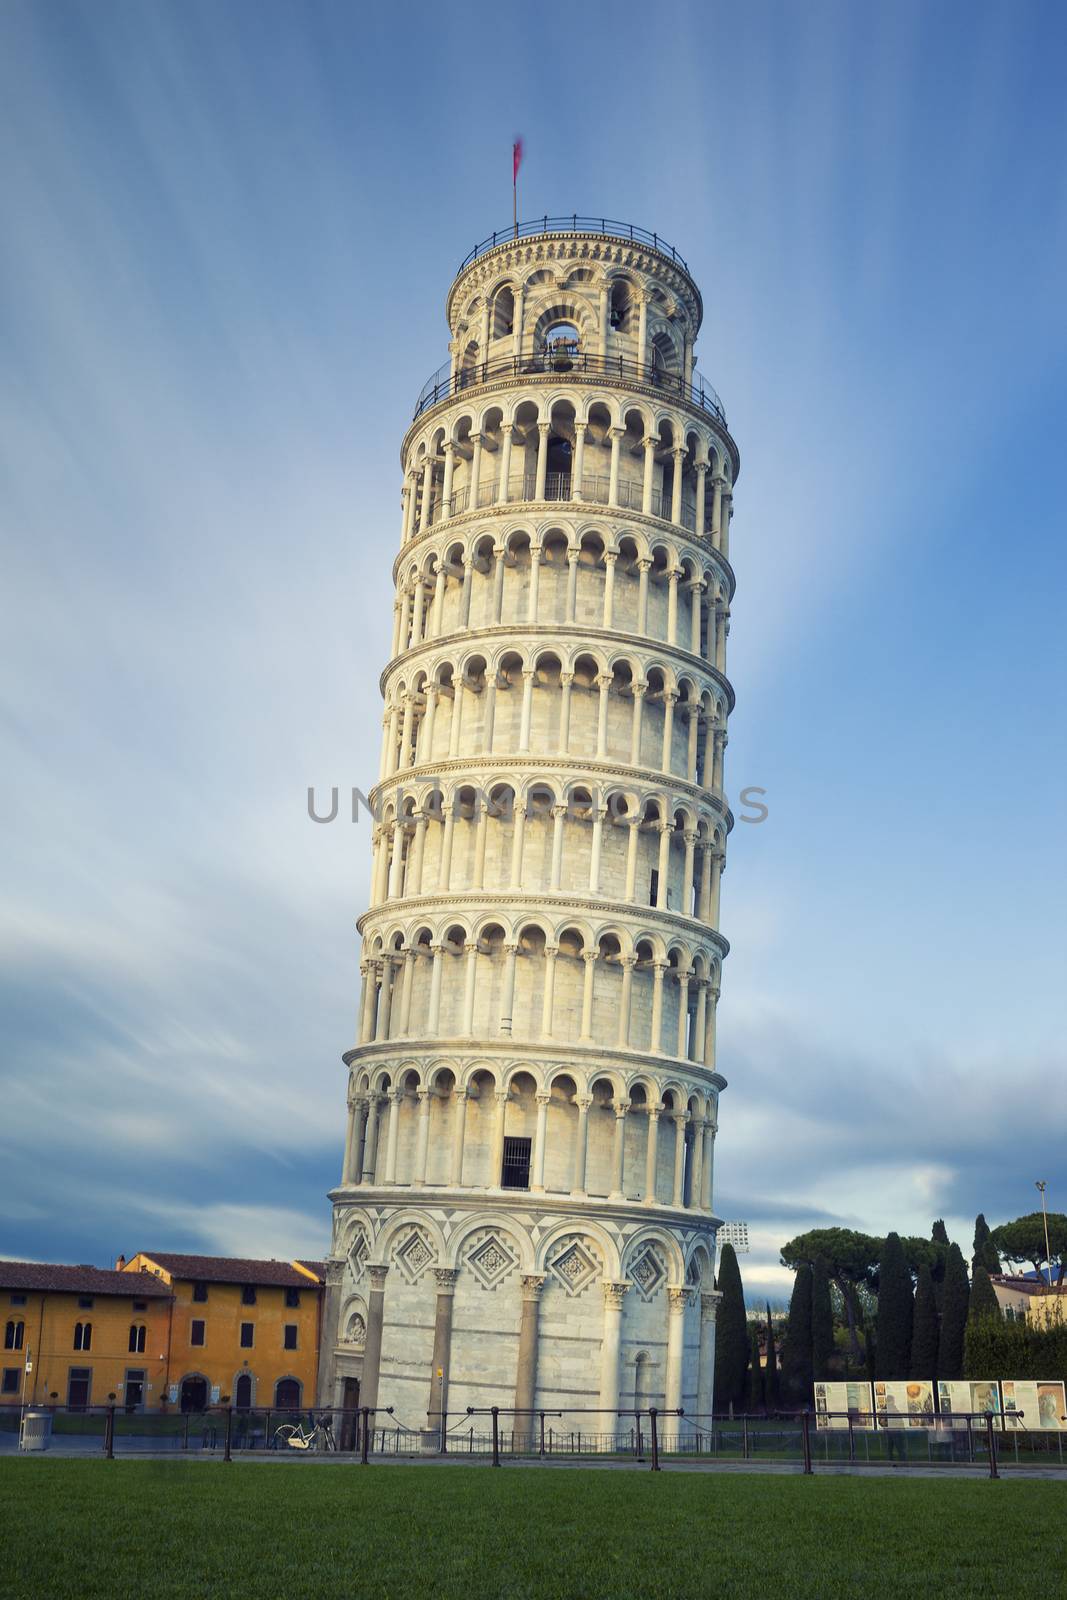 Famous Leaning Tower of Pisa by vwalakte